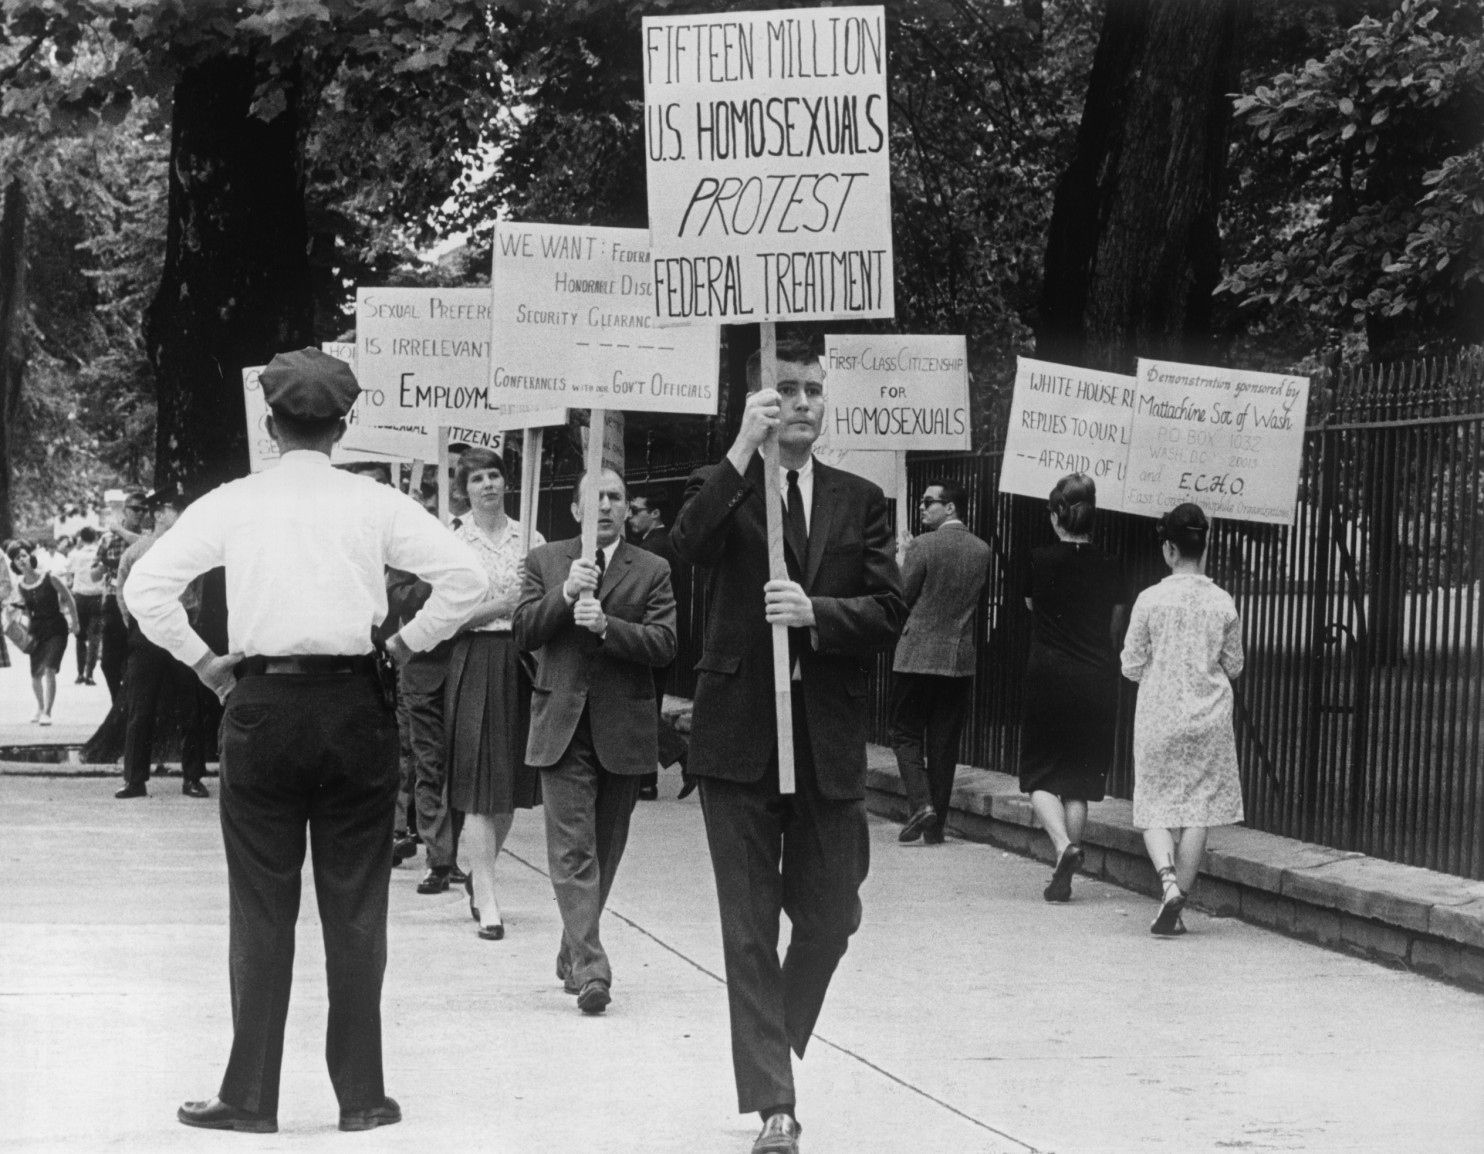 First picket by members of the Washington Mattachine organization in front of the White House on April 17, 1965.